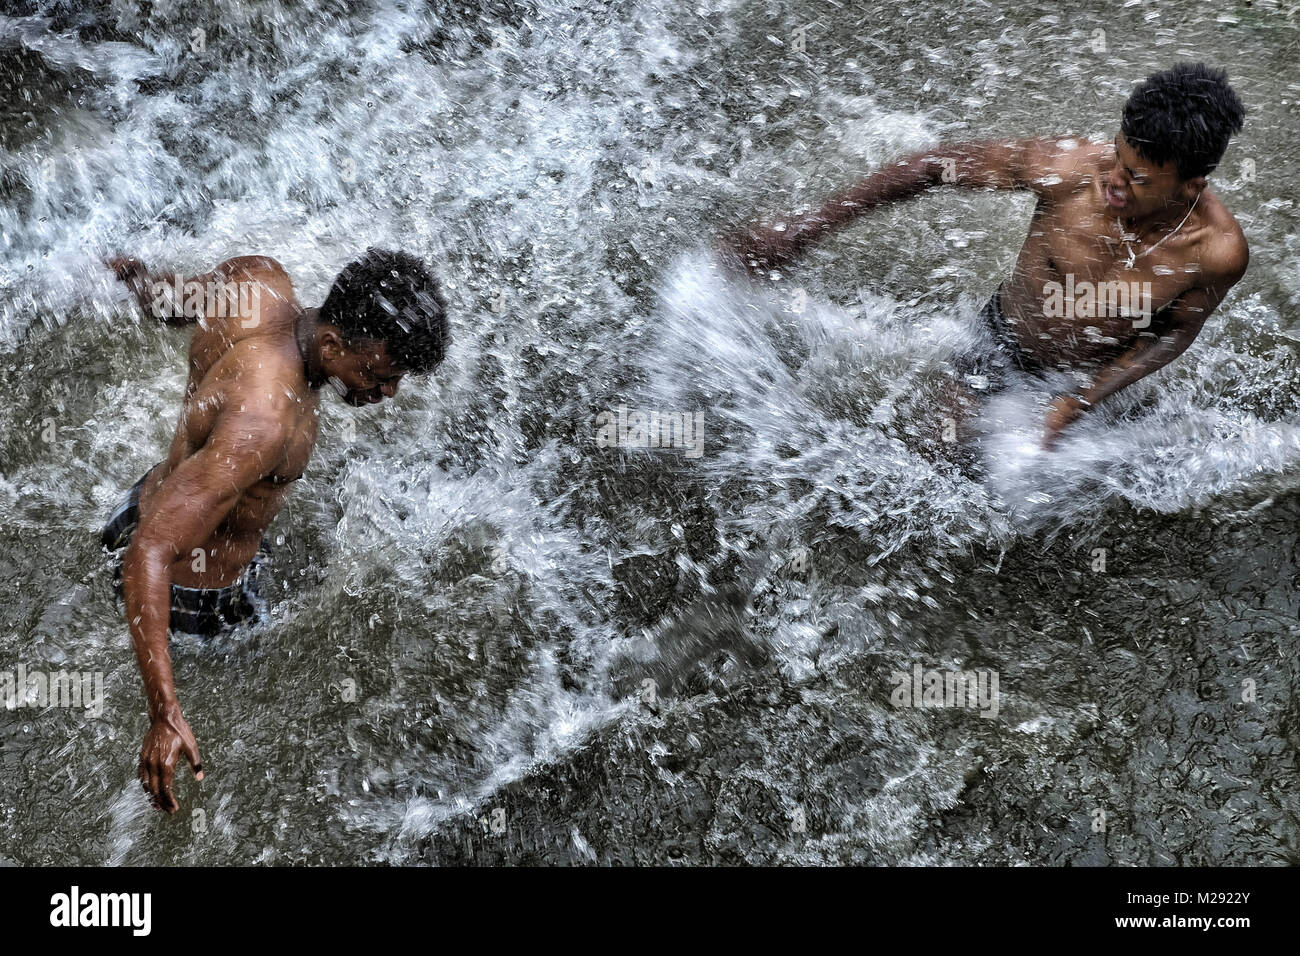 January 19, 2018 - Gondar, Amhara Region, Ethiopia - Pilgrims bathing in the blessed waters of the Fasilides Baths..The annual Timkat festival, an Orthodox Christian celebration of Epiphany, remembers the baptism of Jesus in the Jordan river. During the festival, tabots, models of the Ark of the Covenant, are taken from churches around the city of Gondar and paraded through the streets to Fasilides Bath. Where finally the pilgrims end up bathing in the water blessed by the priests. (Credit Image: © Oscar Espinosa/SOPA via ZUMA Wire) Stock Photo